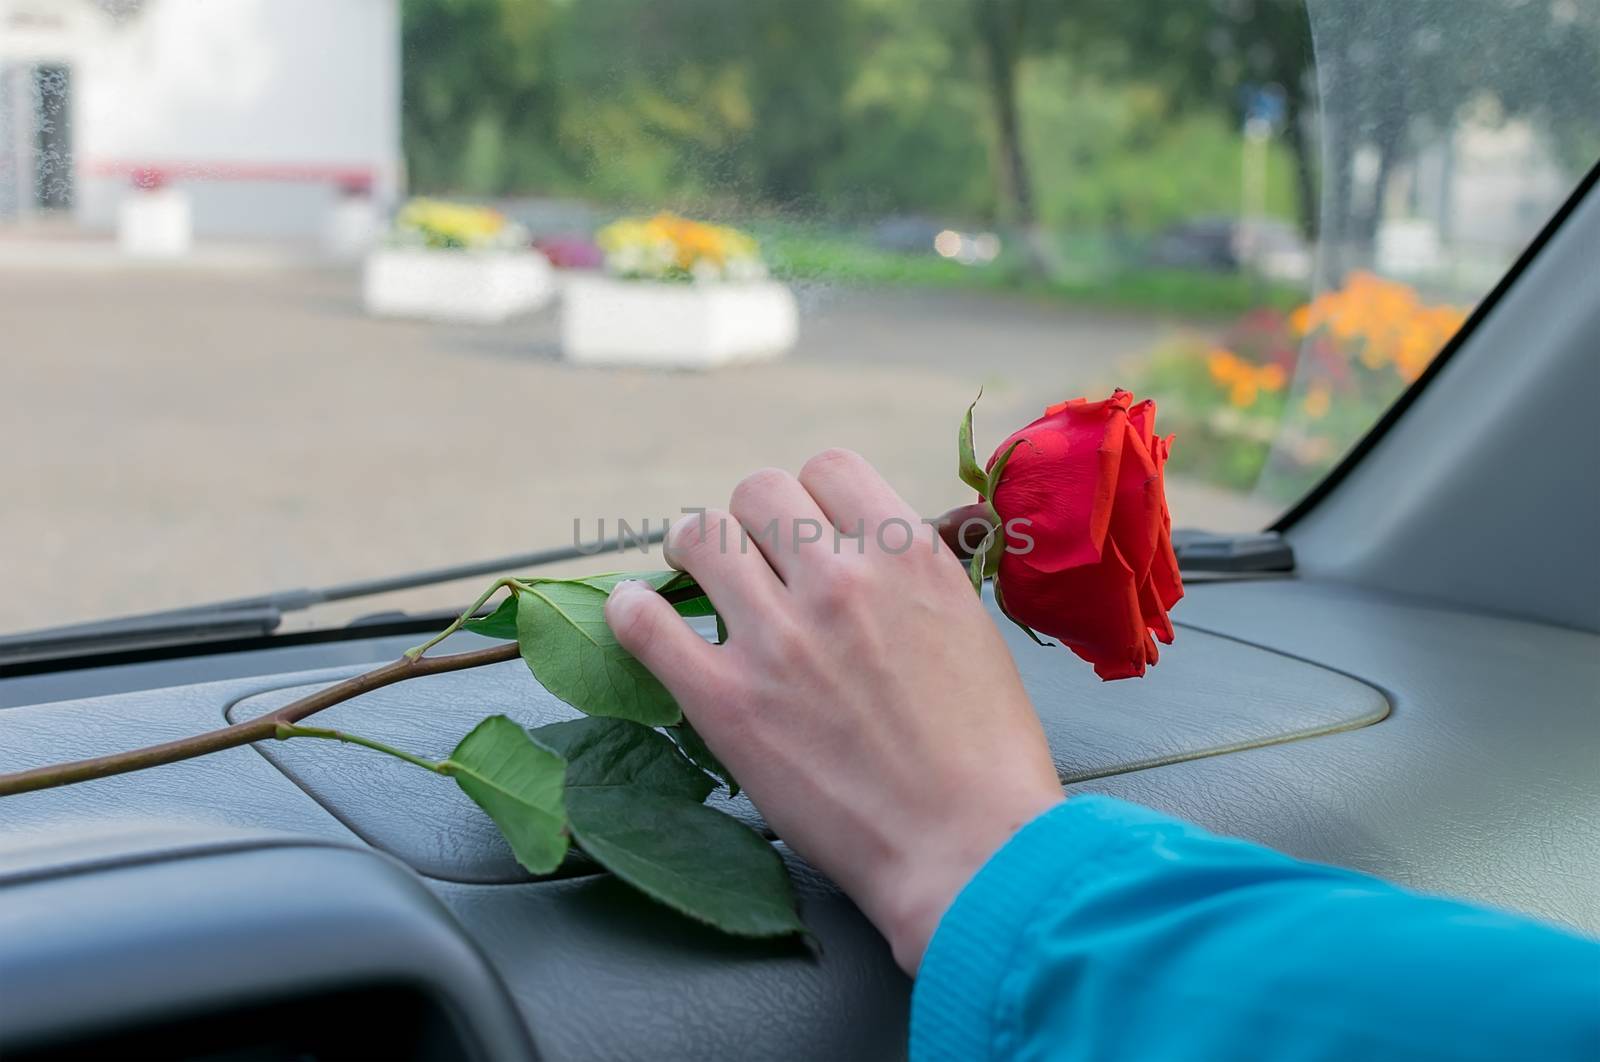 a woman hand takes a red rose flower that lies on the dashboard inside the car against the background of a city street and flower beds in the Park